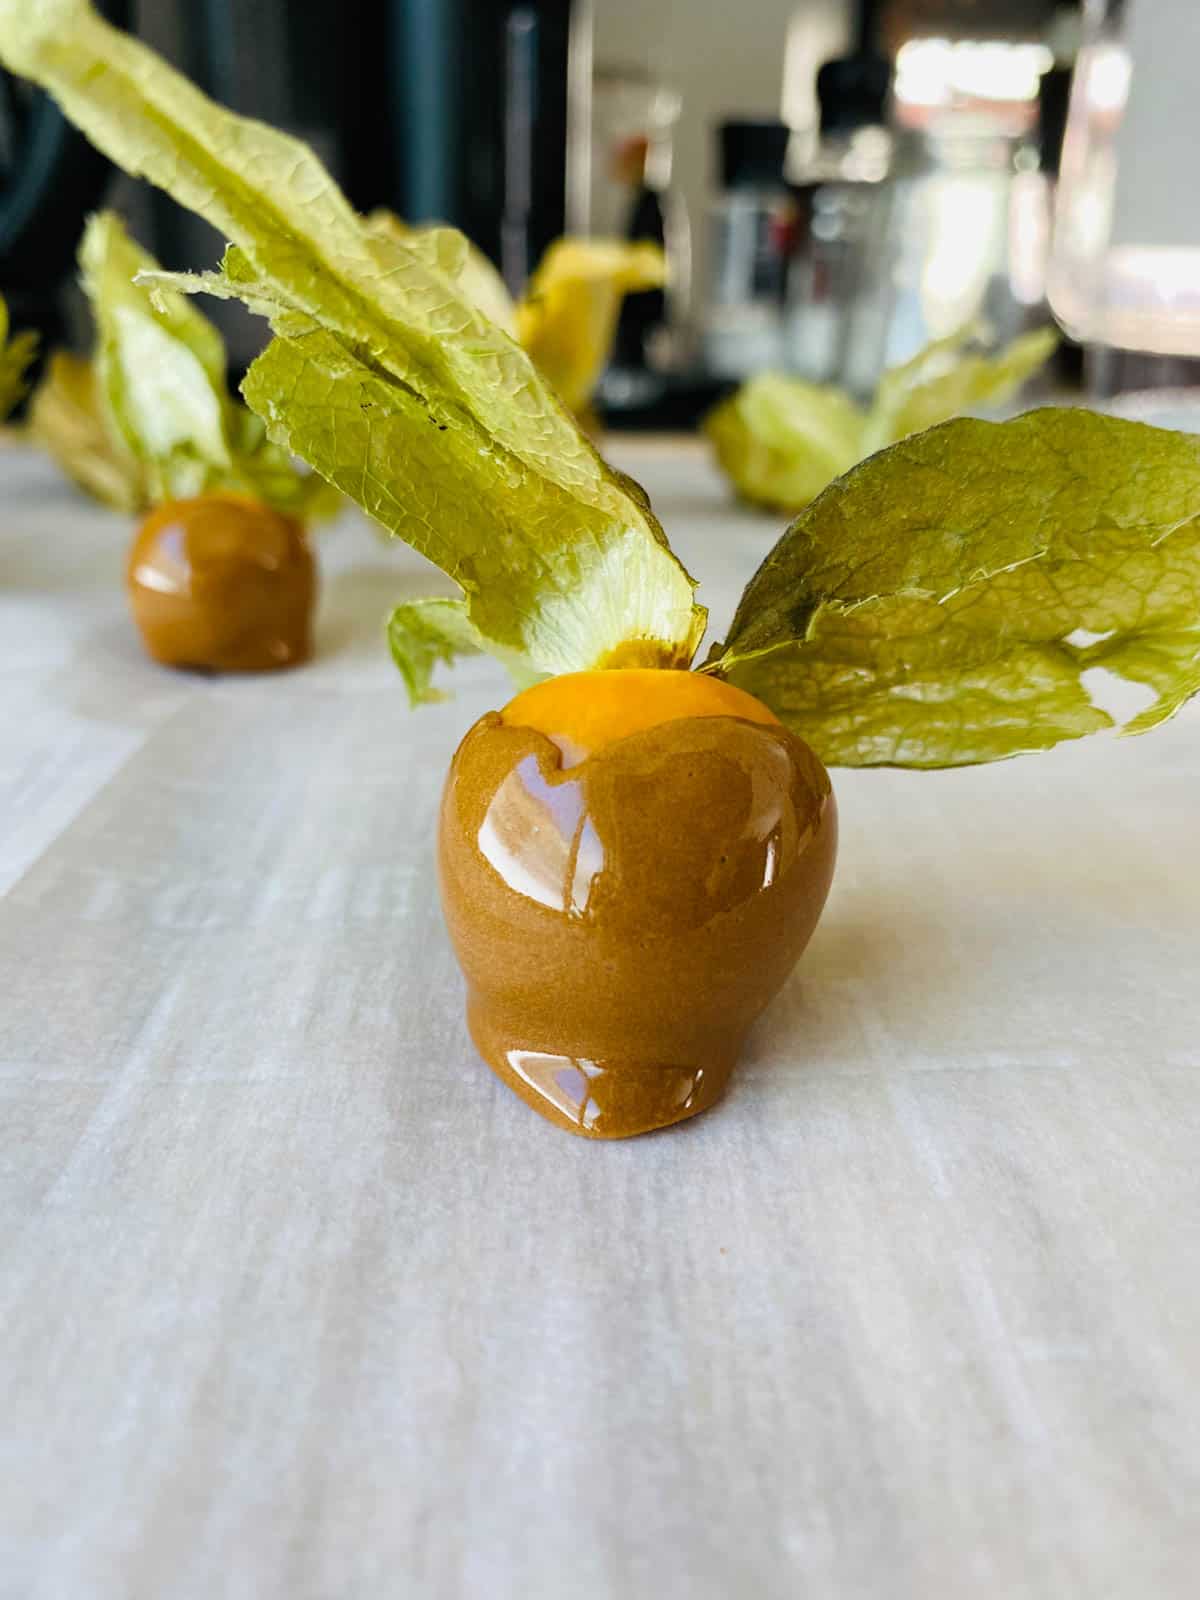 Cape gooseberry with caramel toffee coating